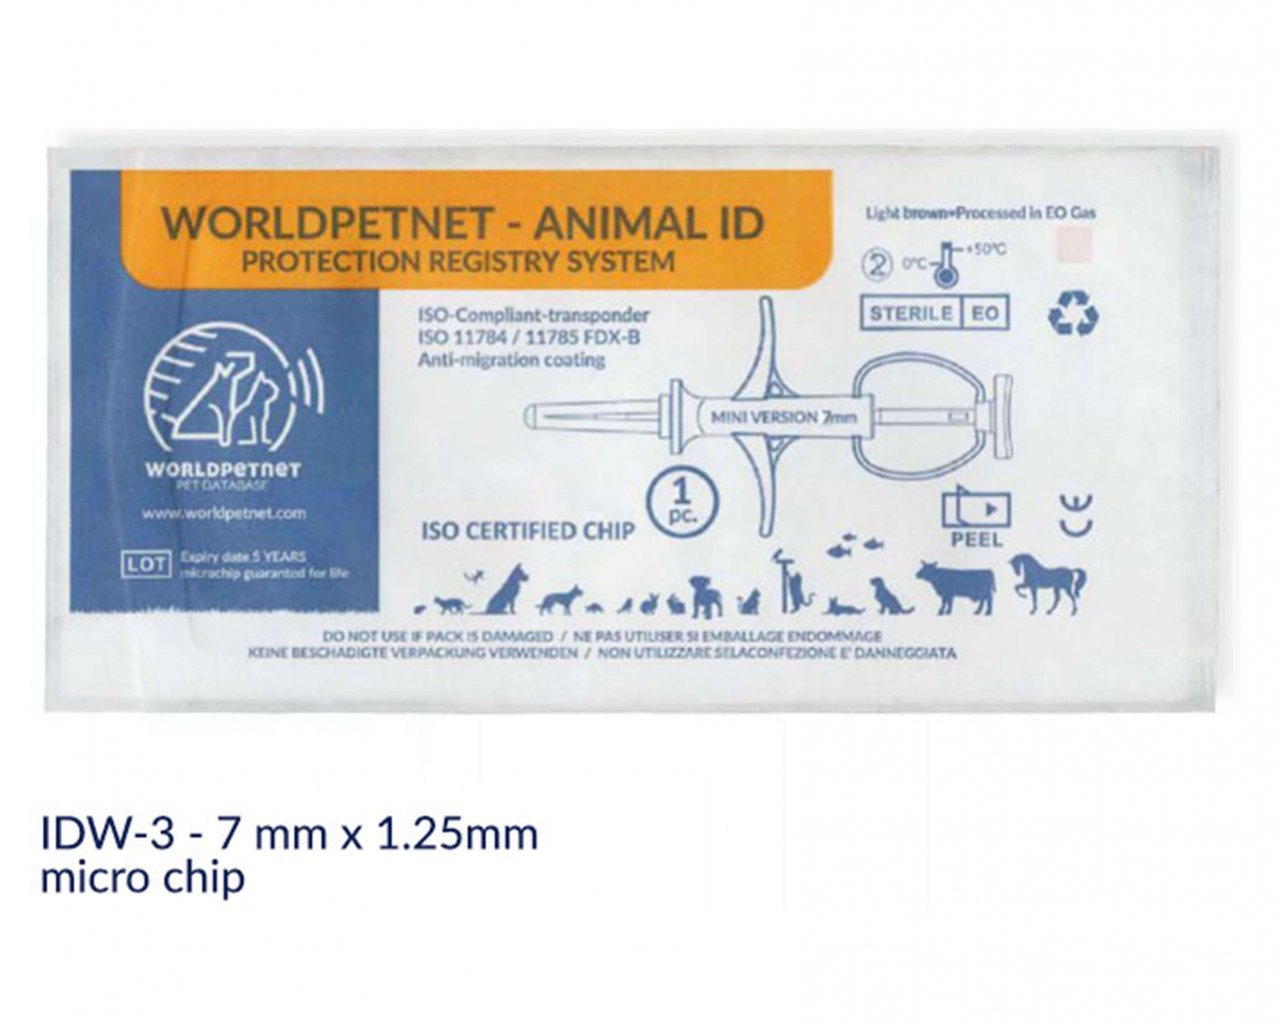 PET MICROCHIP FOR ANIMAL IDW-3 (CODE 900) 7MMX1.25MM MICRO - microchip for dog, animals, pet identification reader #13